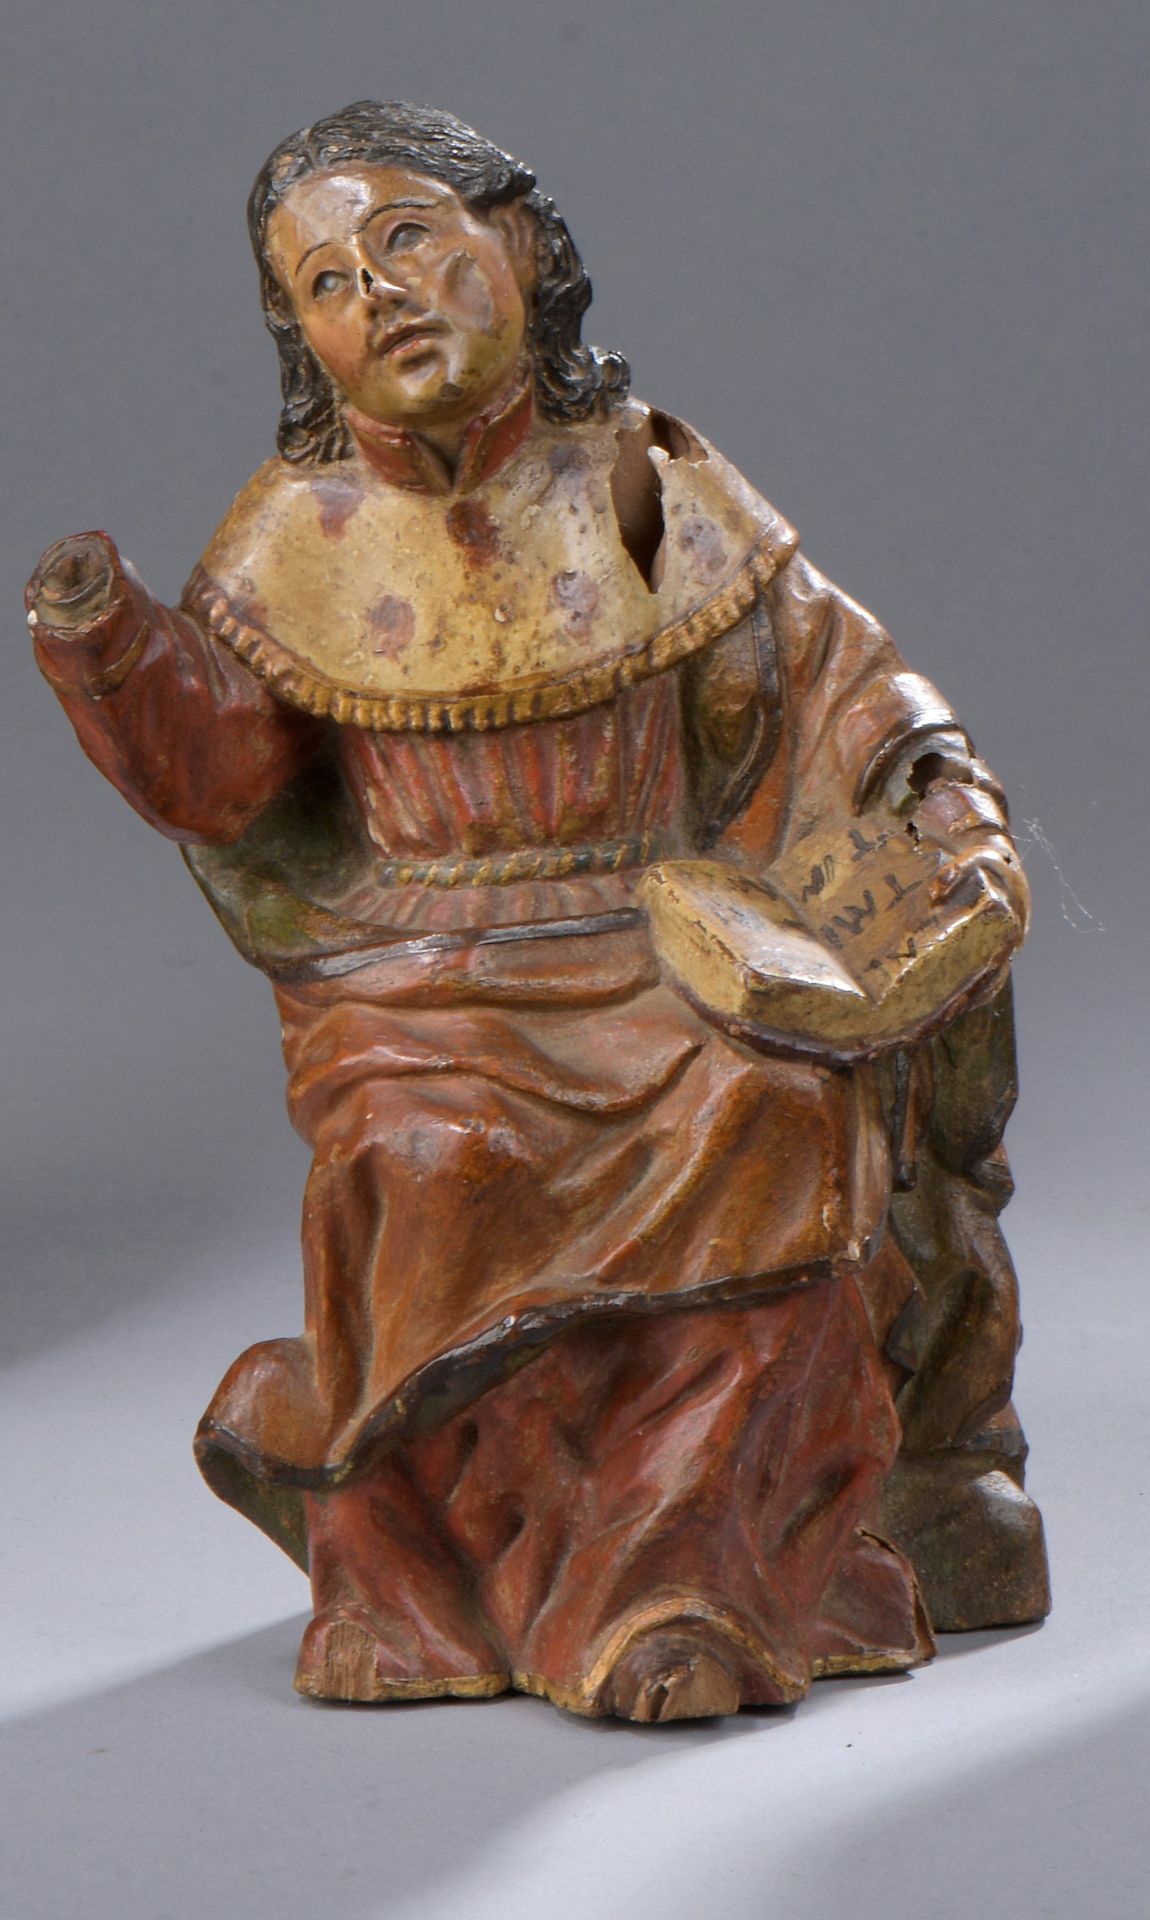 Null Saint Evangelist in wood carved in the round and polychromed, glass eyes.

&hellip;